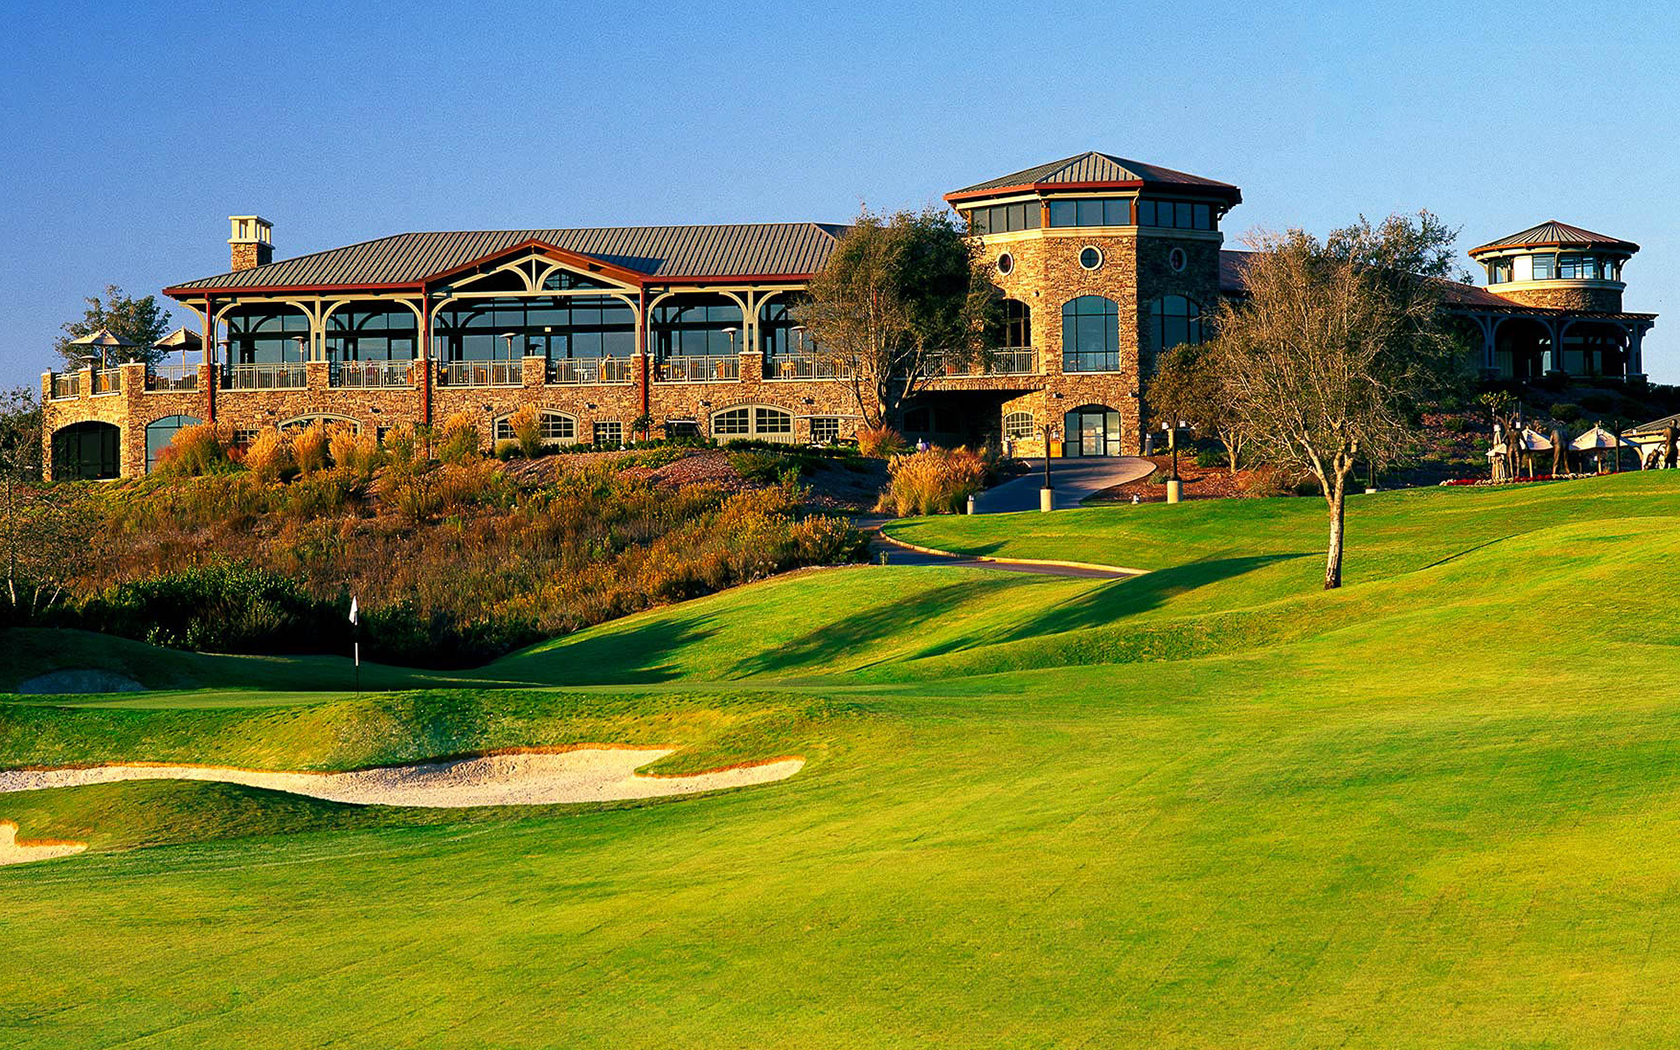 the main building overlooking the golf course during the day